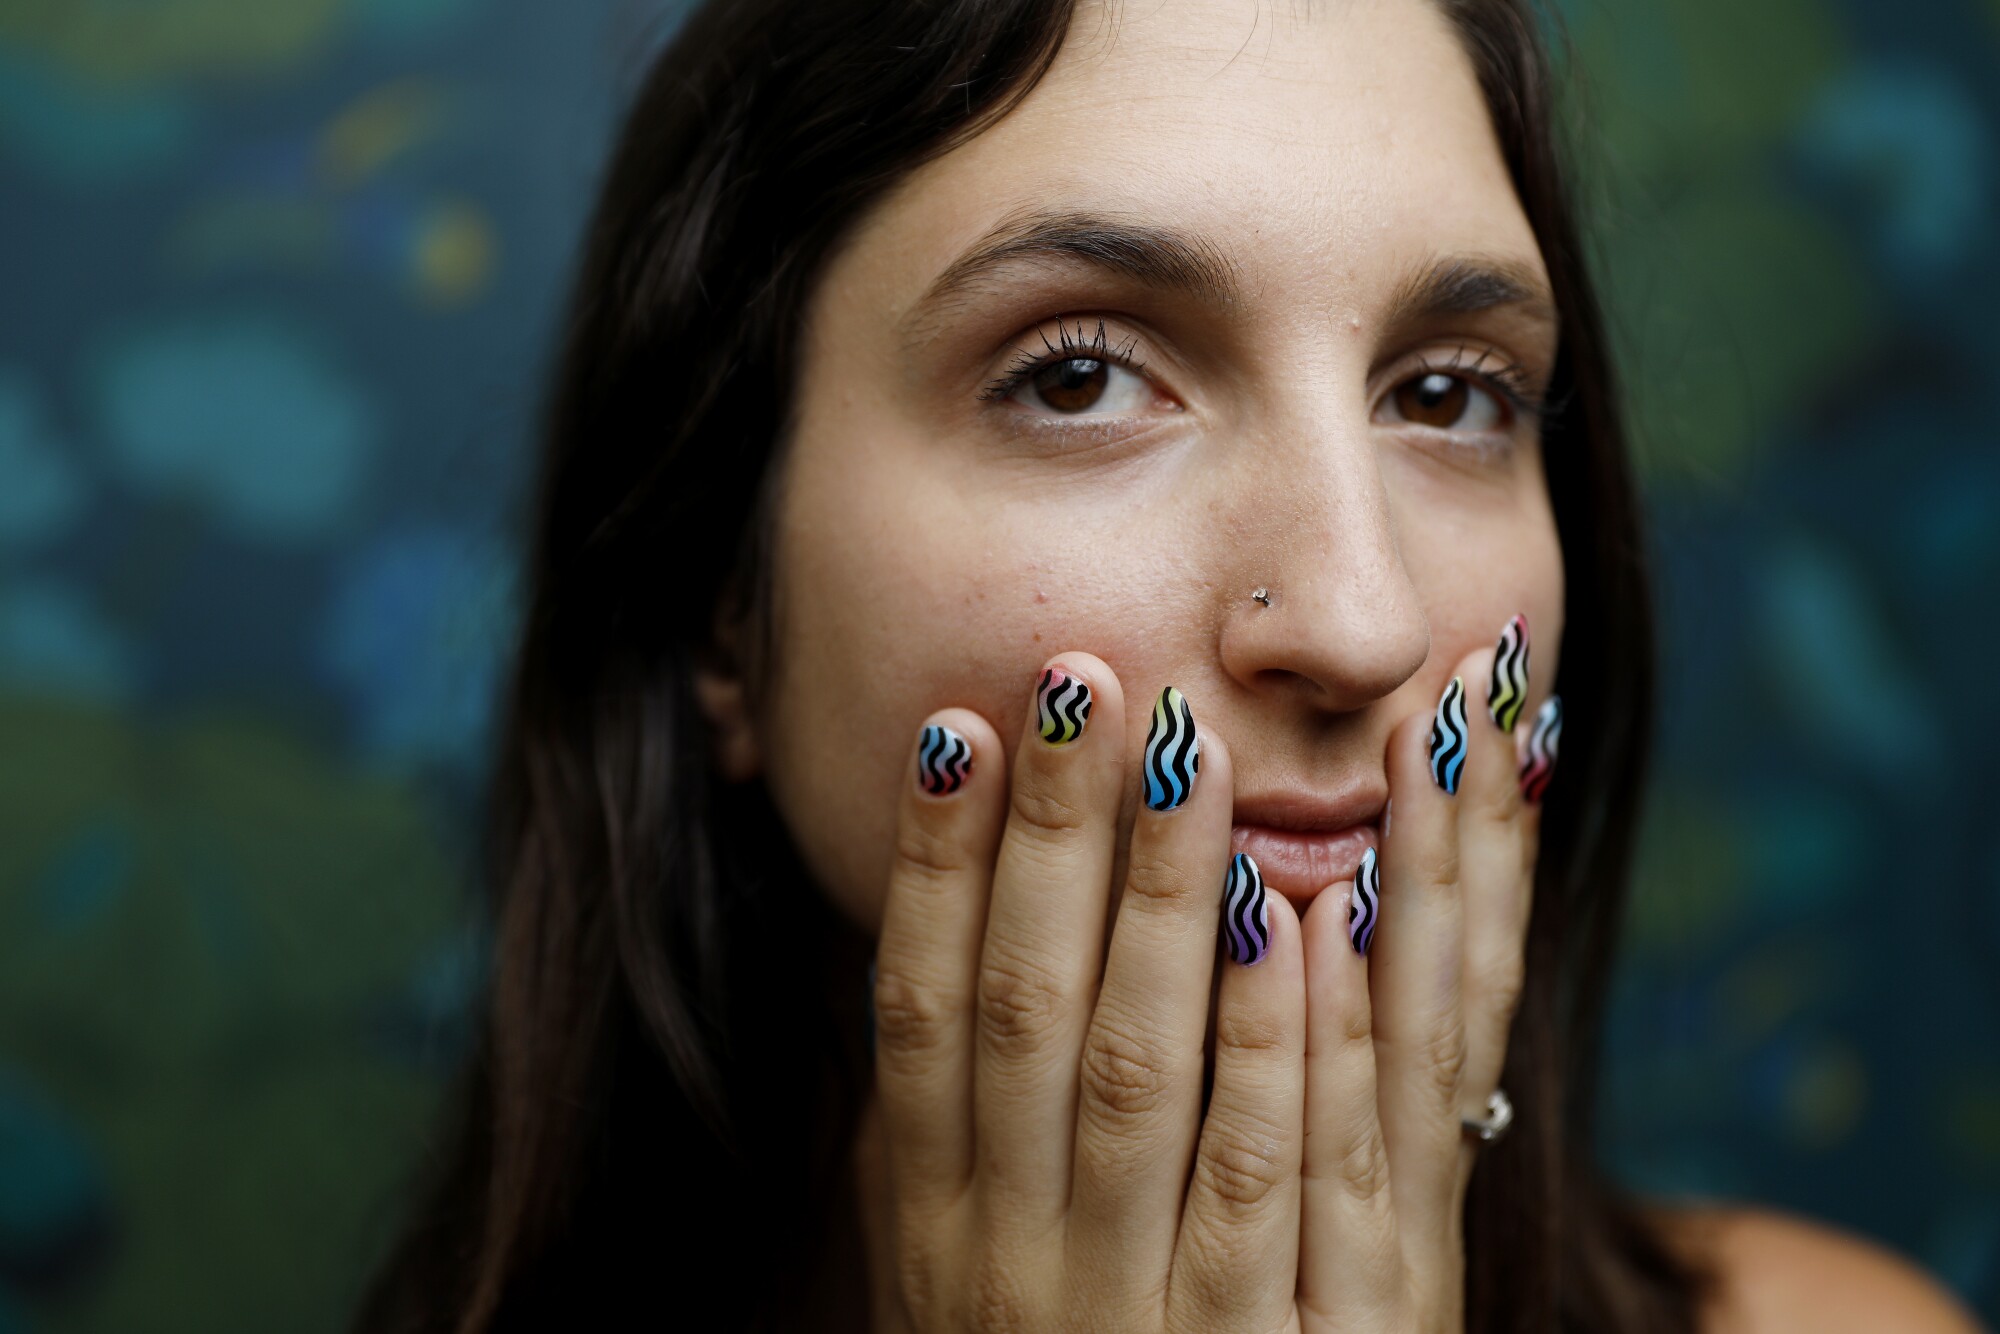 A woman showing off her nails.